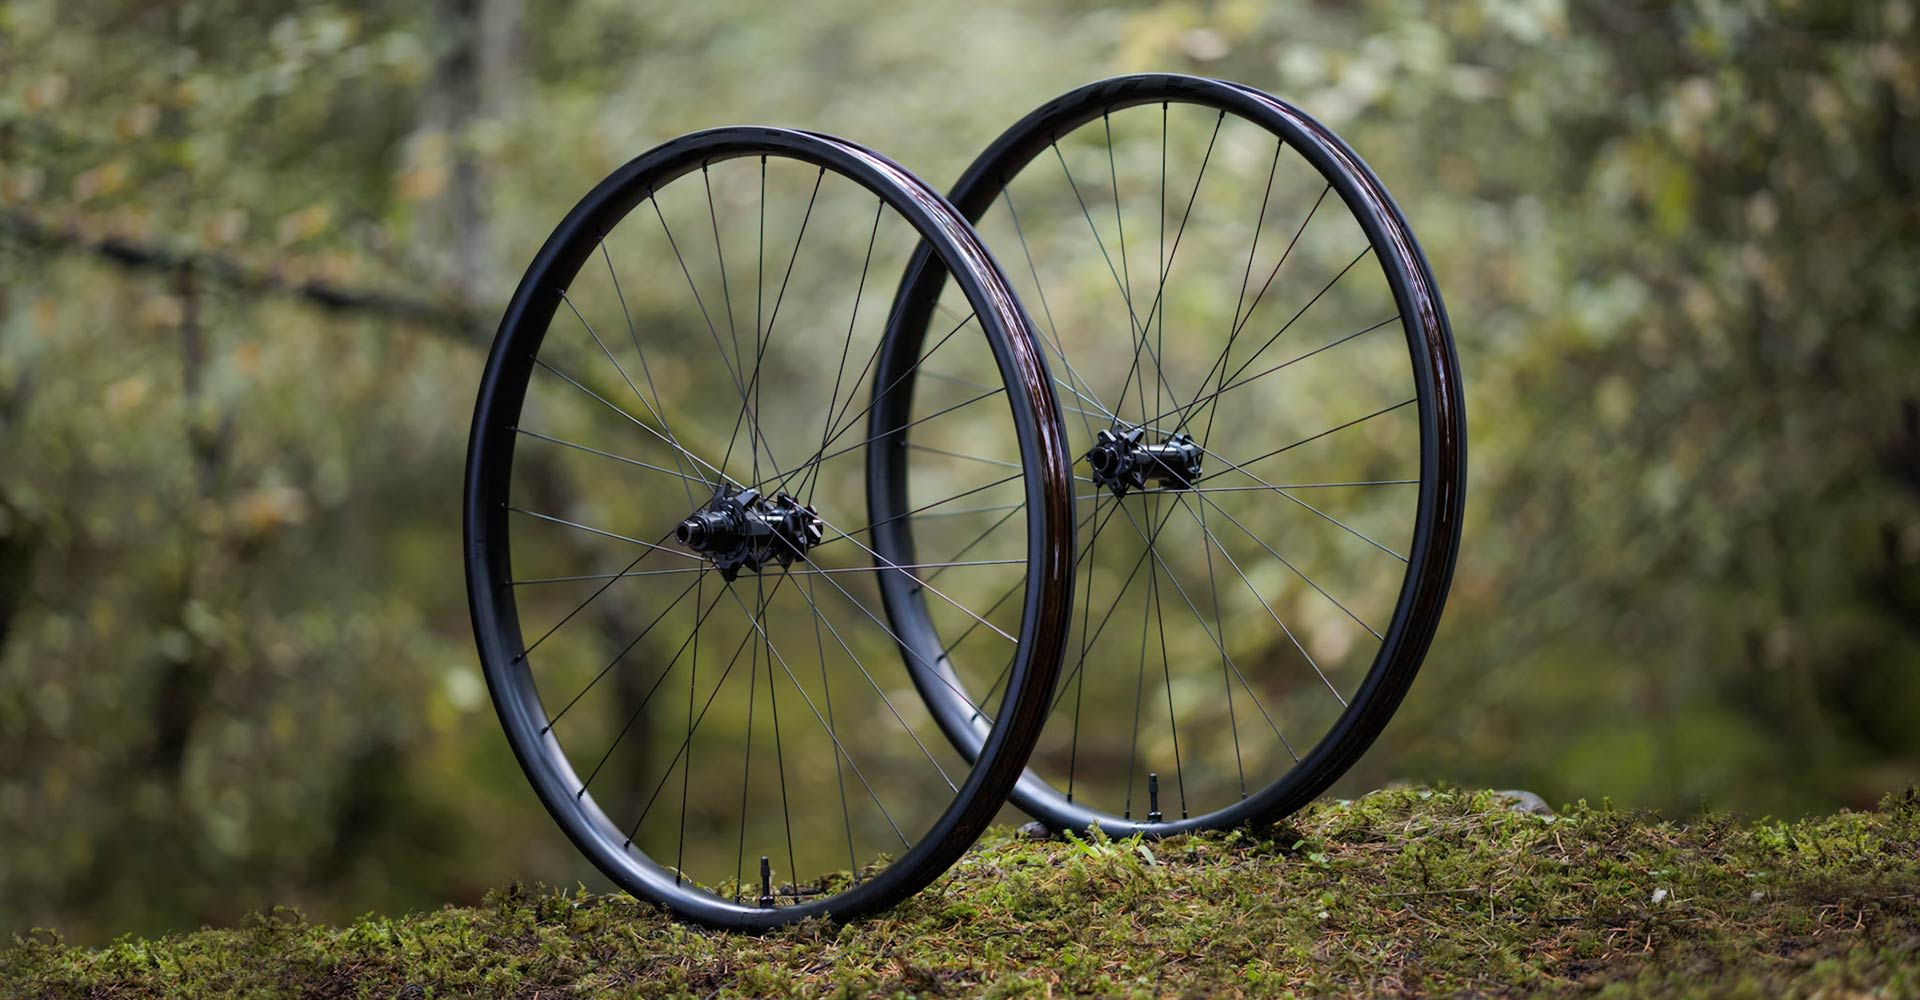 Giant Mountain Bike Wheels | Giant Bicycles Official site